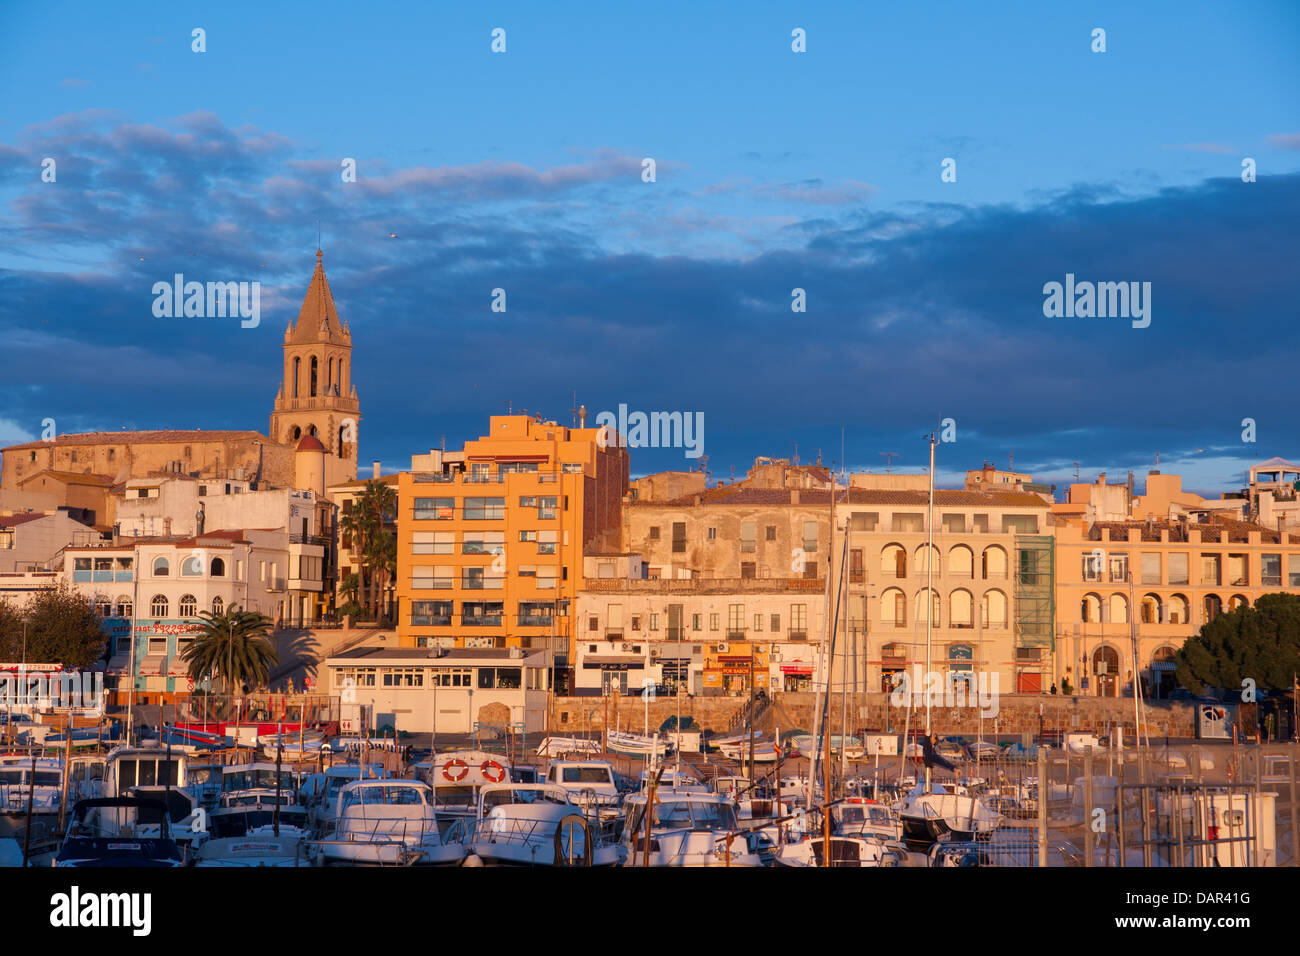 The town of Palamos photographed at sunset. Costa Brava, Spain. Stock Photo